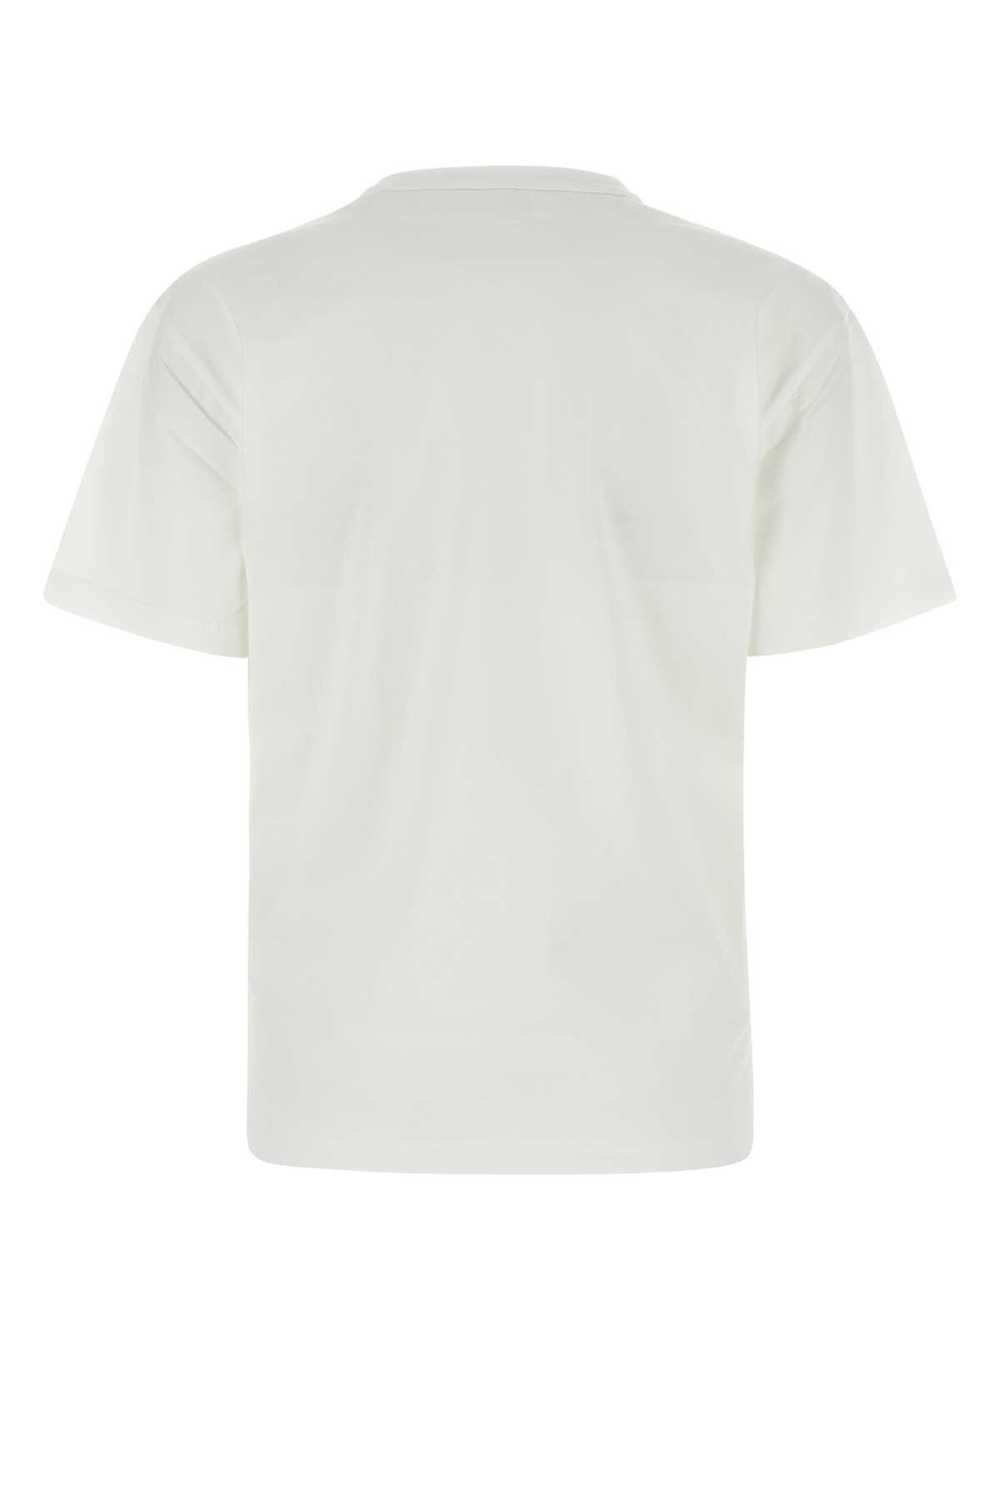 T by Alexander Wang White Cotton T-Shirt - image 2